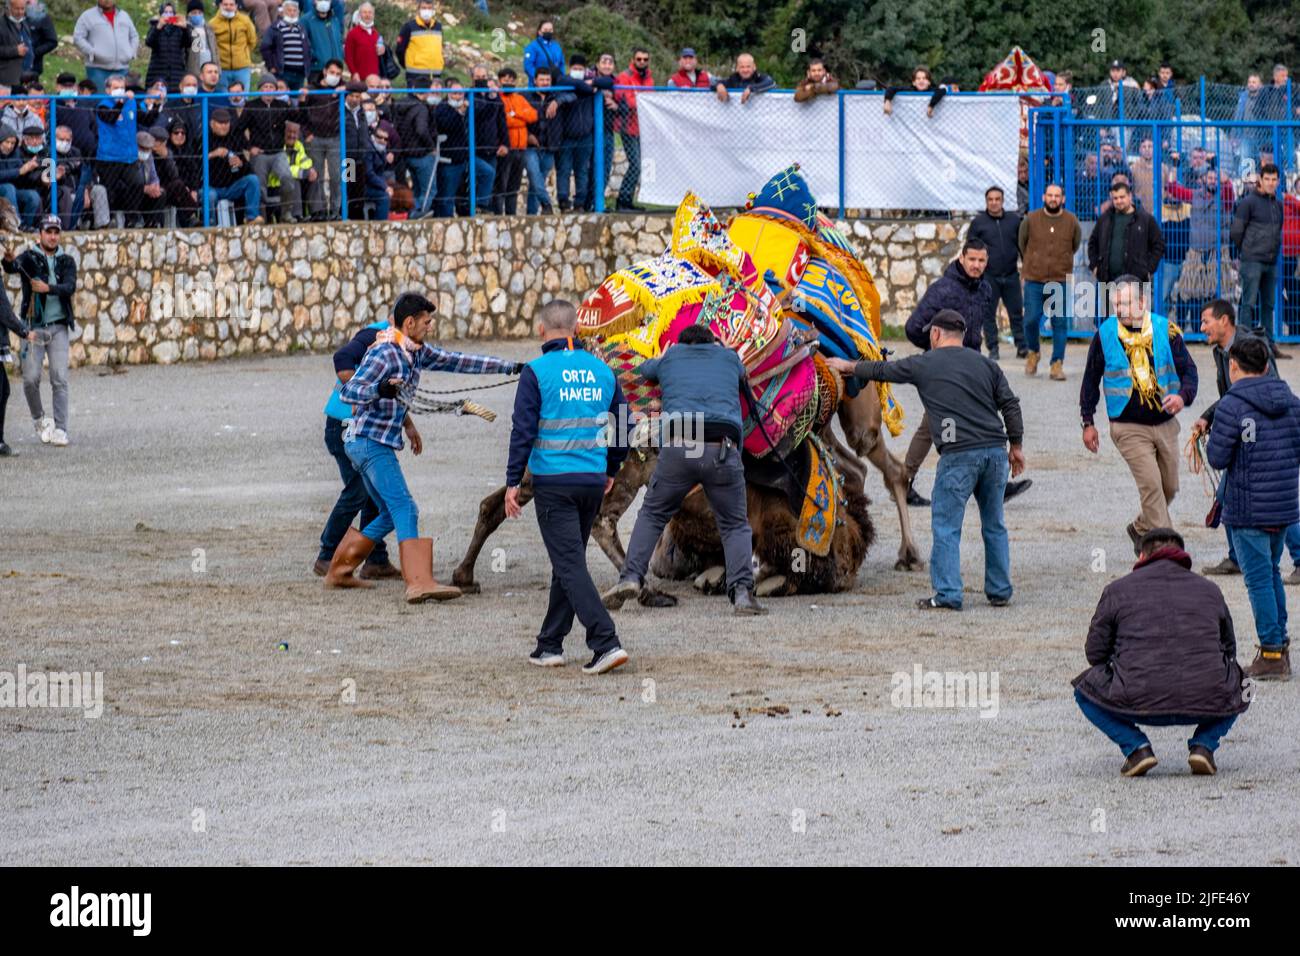 Bodrum, Turkey - 8th Jan. 2022: Traditional camel wrestling in Bodrum, Aegean Region of Turkey. Colorfully dressed camels fighting. Blue vest Referee Stock Photo